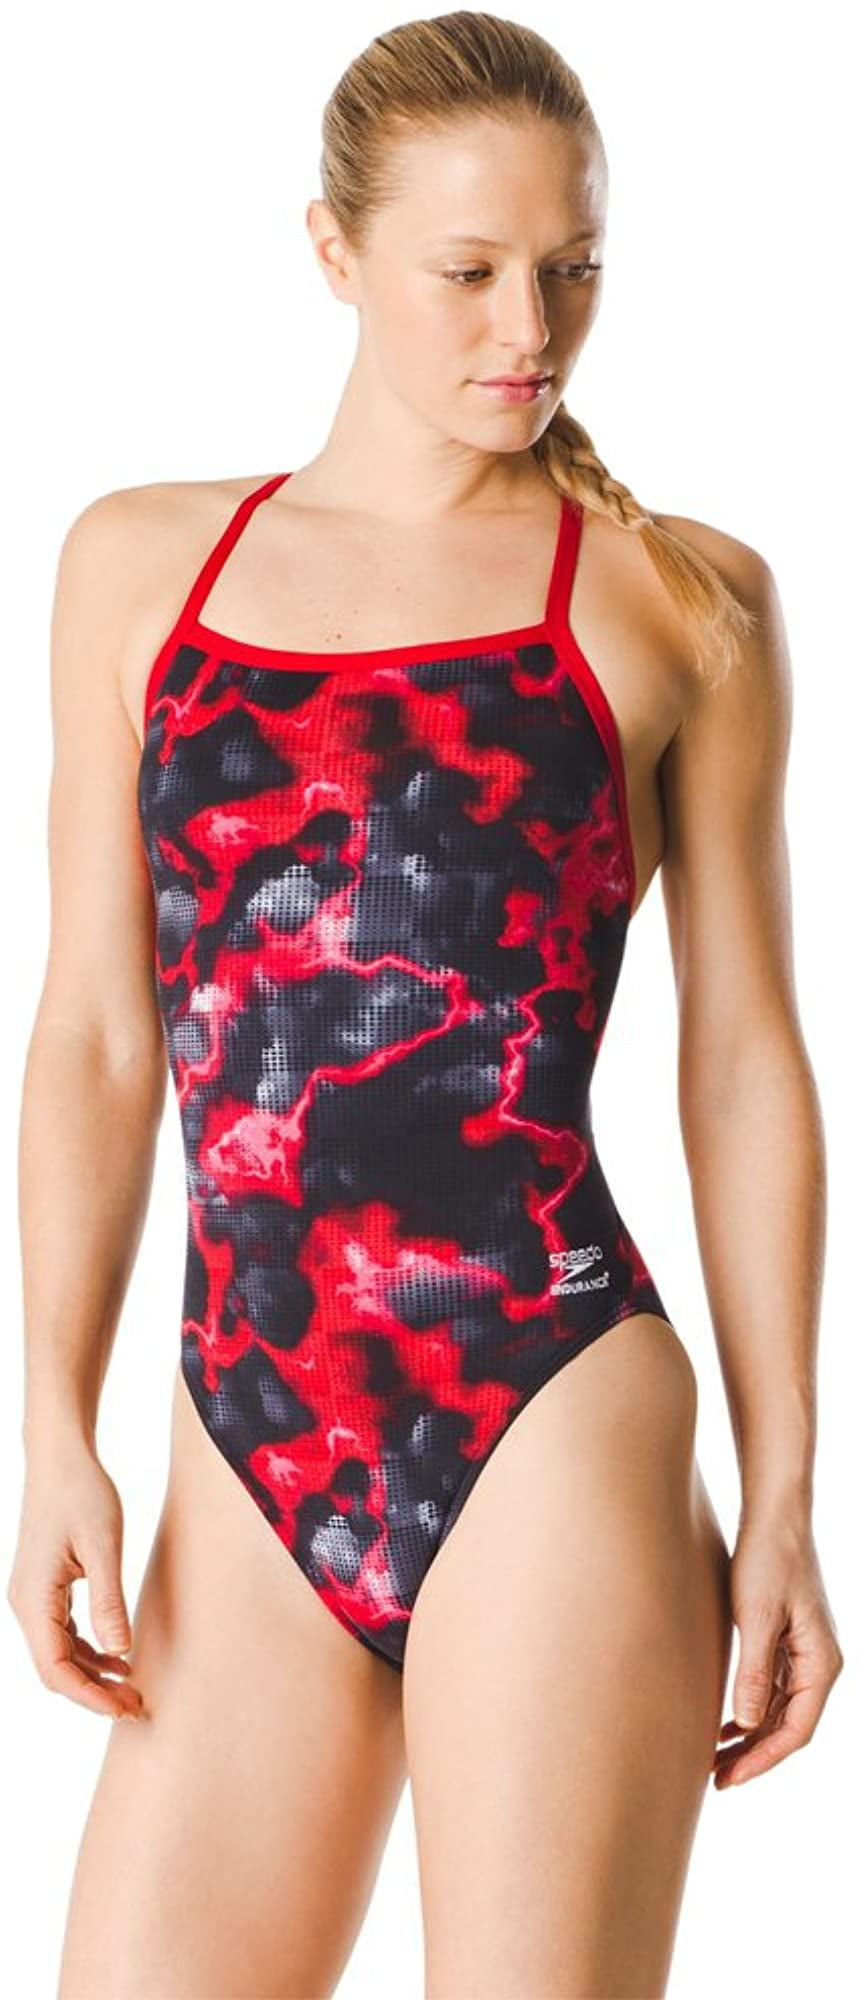 Speedo Women's Swimsuit One Piece Endurance The One Printed Team Colors 